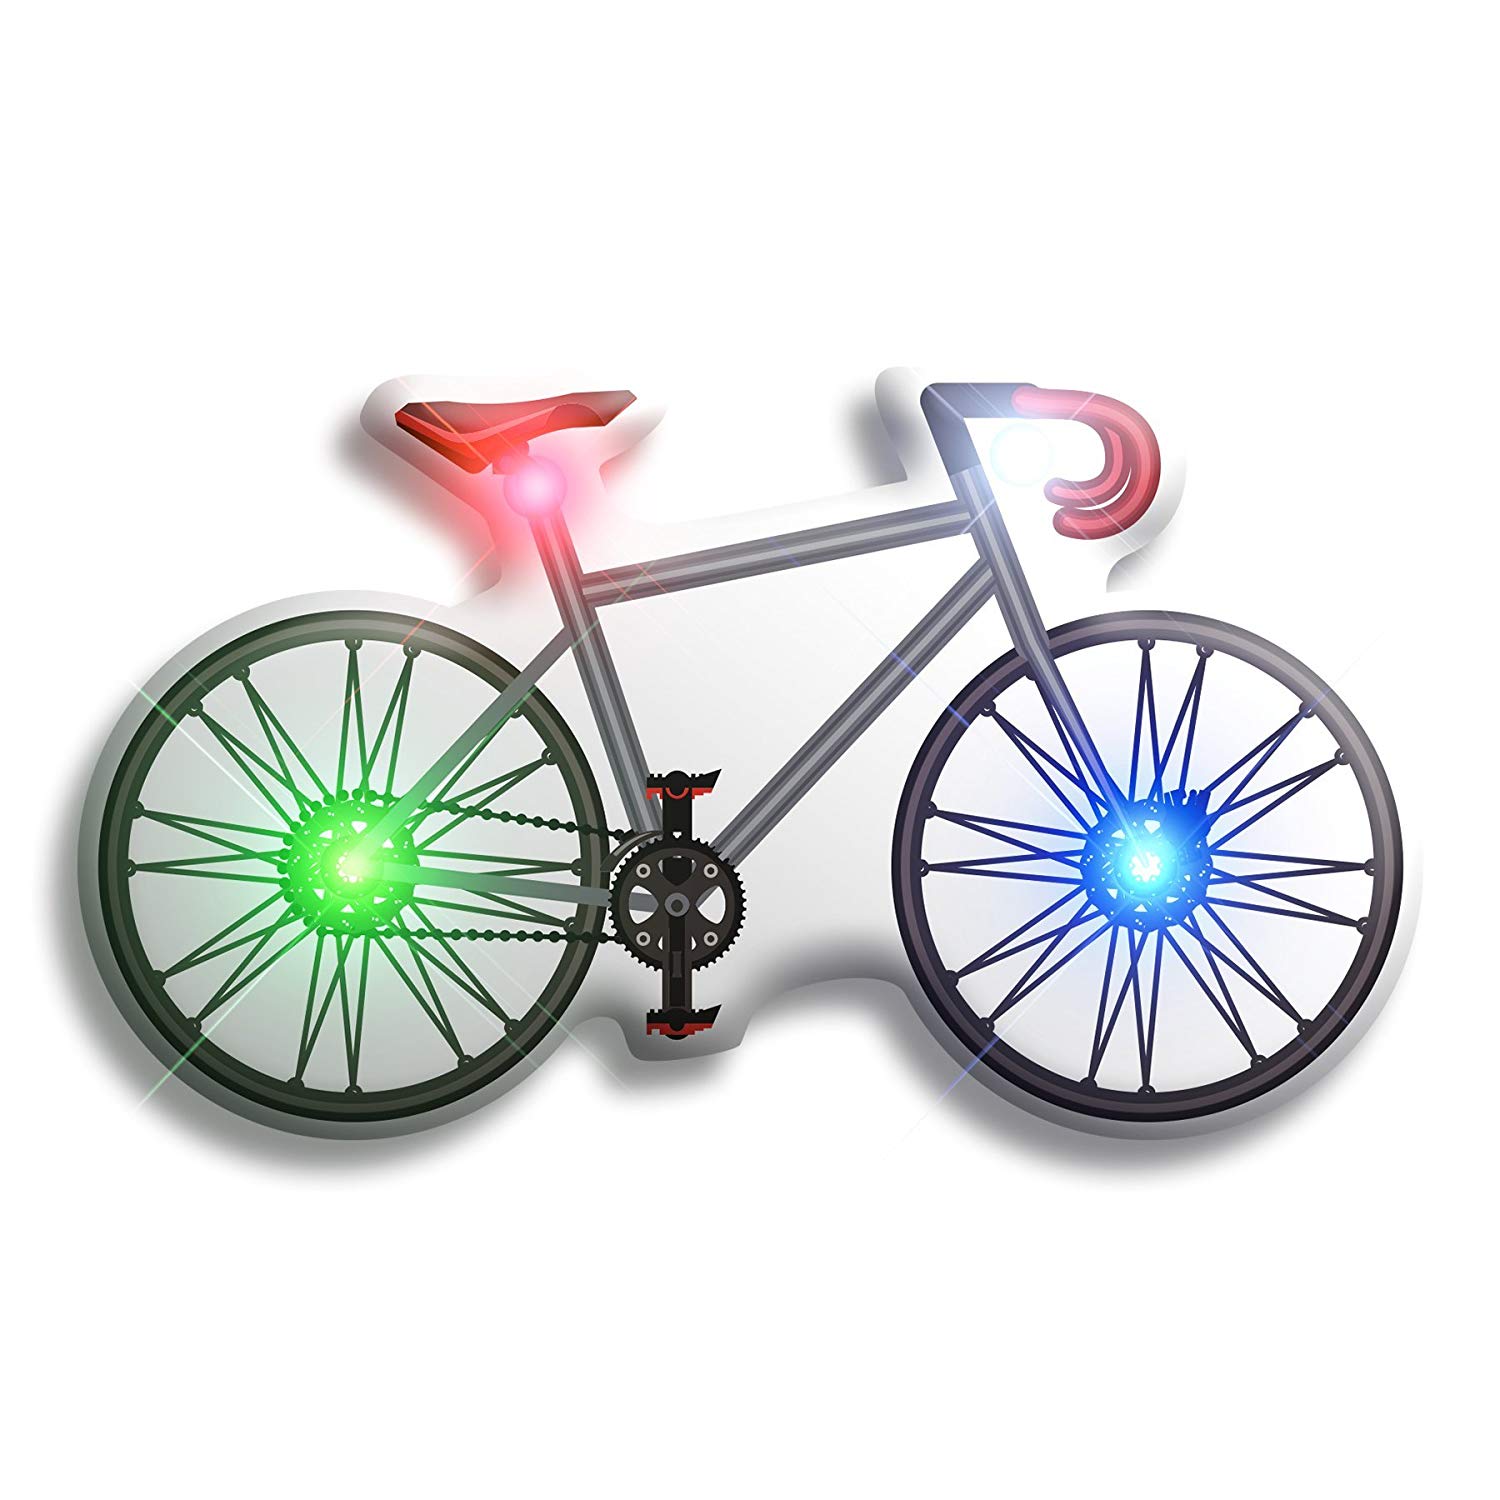 Bicycle Flashing Body Light Lapel Pins All Body Lights and Blinkees 3